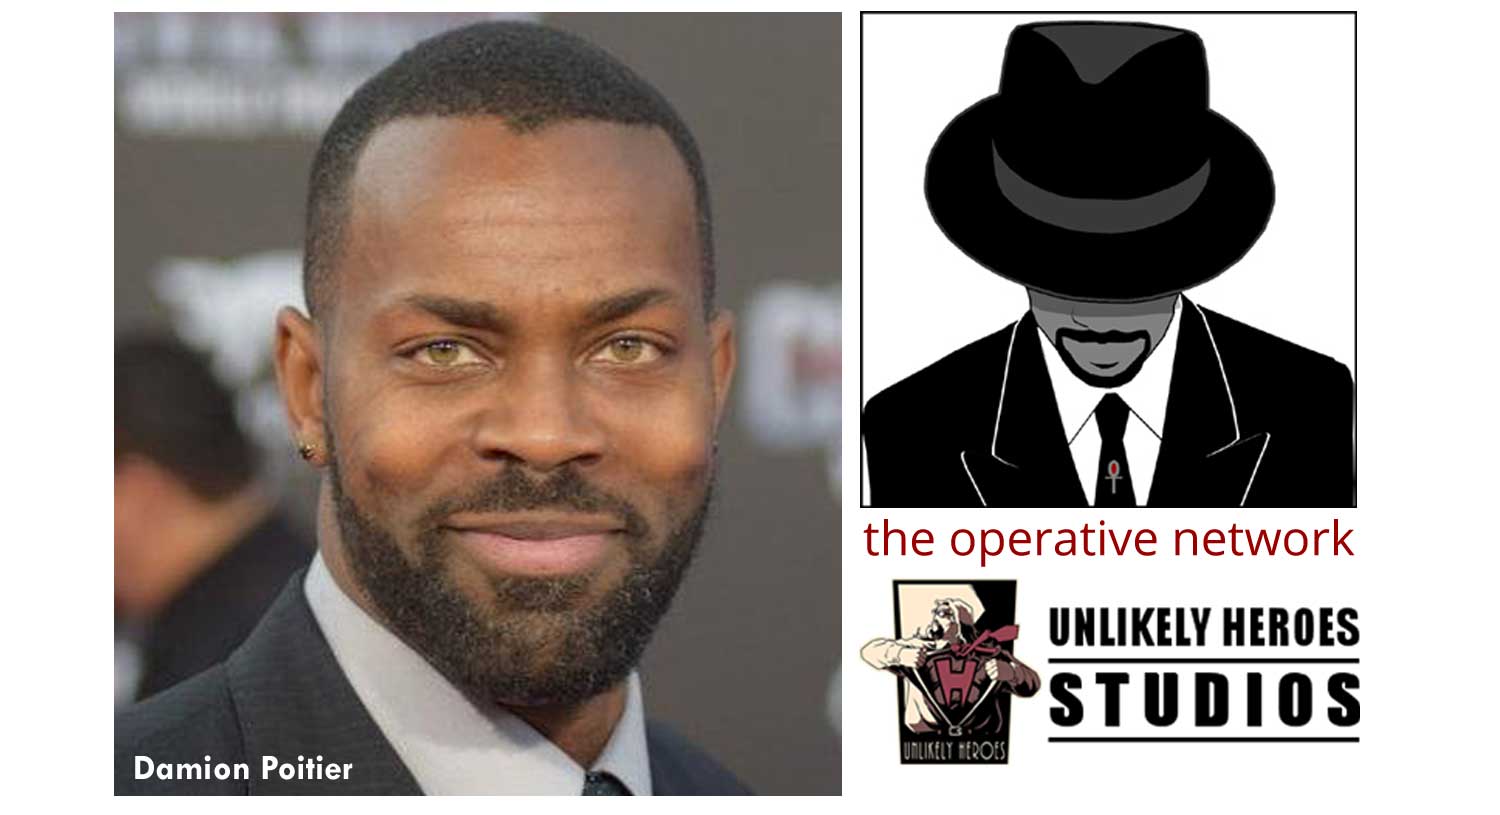 damion poitier, the operative network and unlikely heroes studios